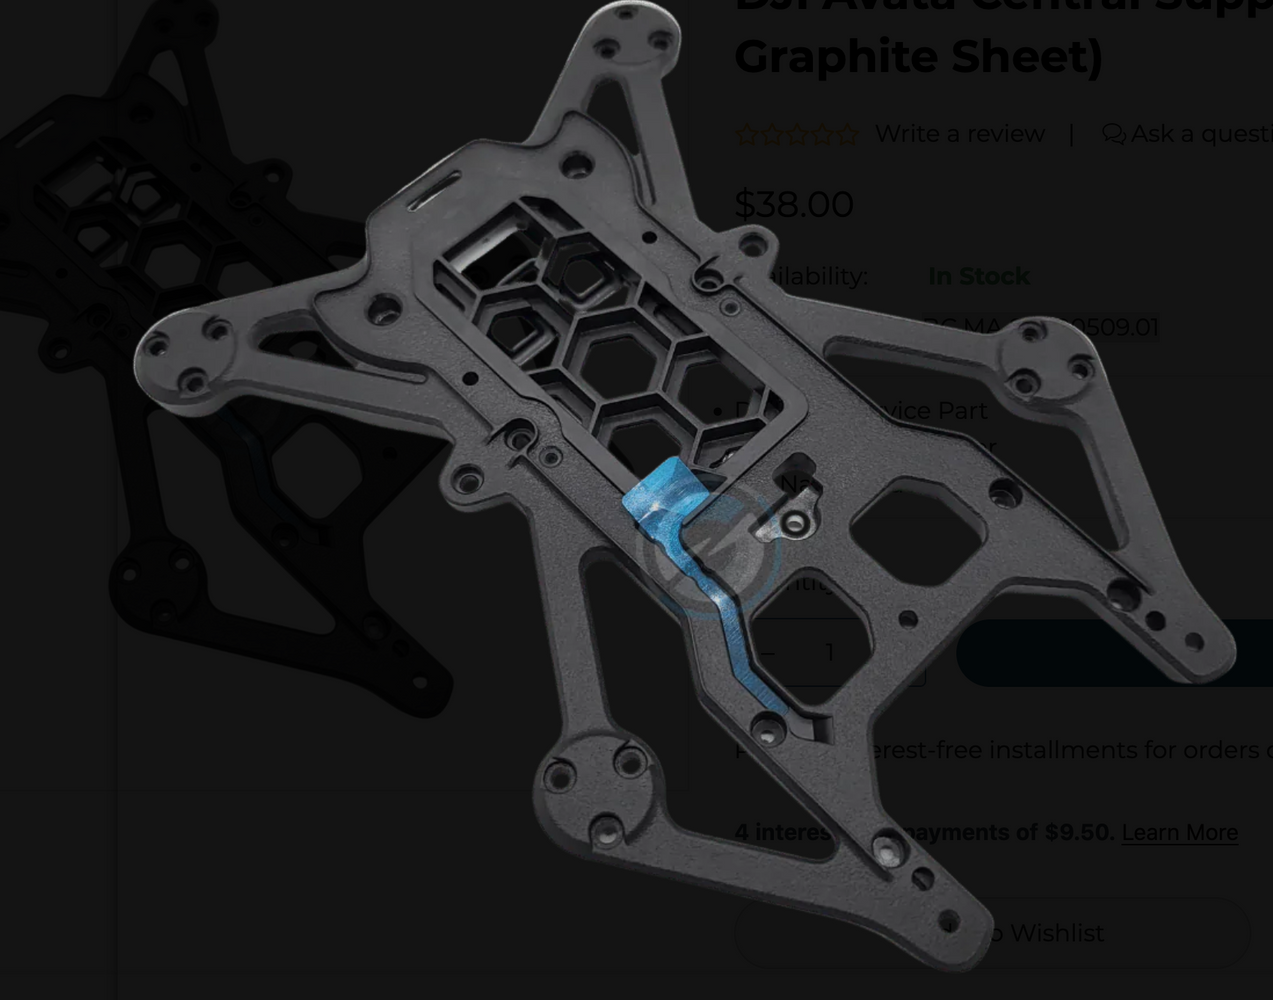 DJI Avata Central Supporting Plate (With Graphite Sheet)